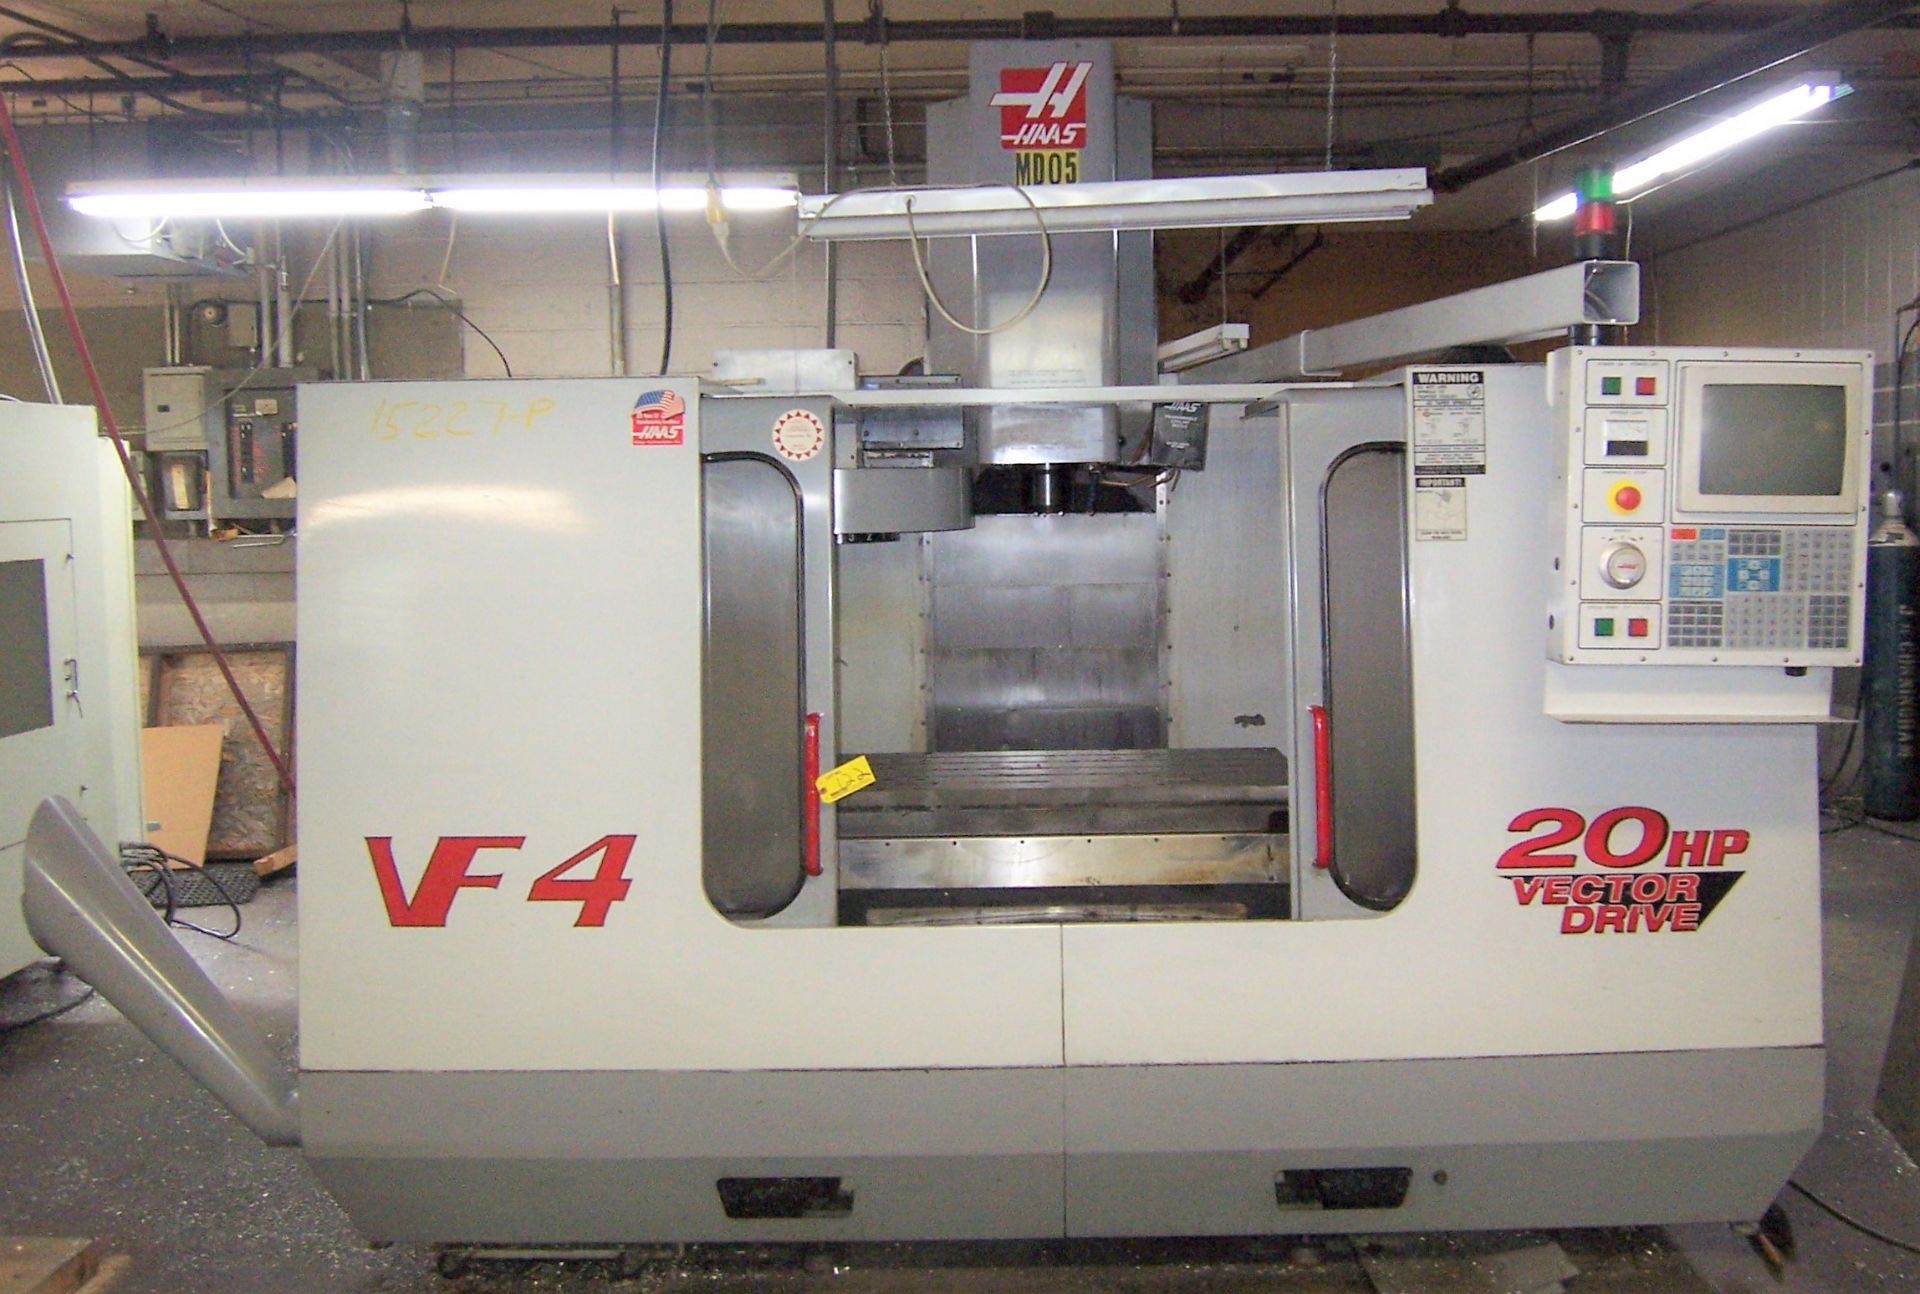 HAAS MDL. VF4 CNC VERTICAL MACHINING CENTER WITH 20-POSITION AUTOMATIC TOOL CHANGER, 20 HP VECTOR - Image 5 of 5